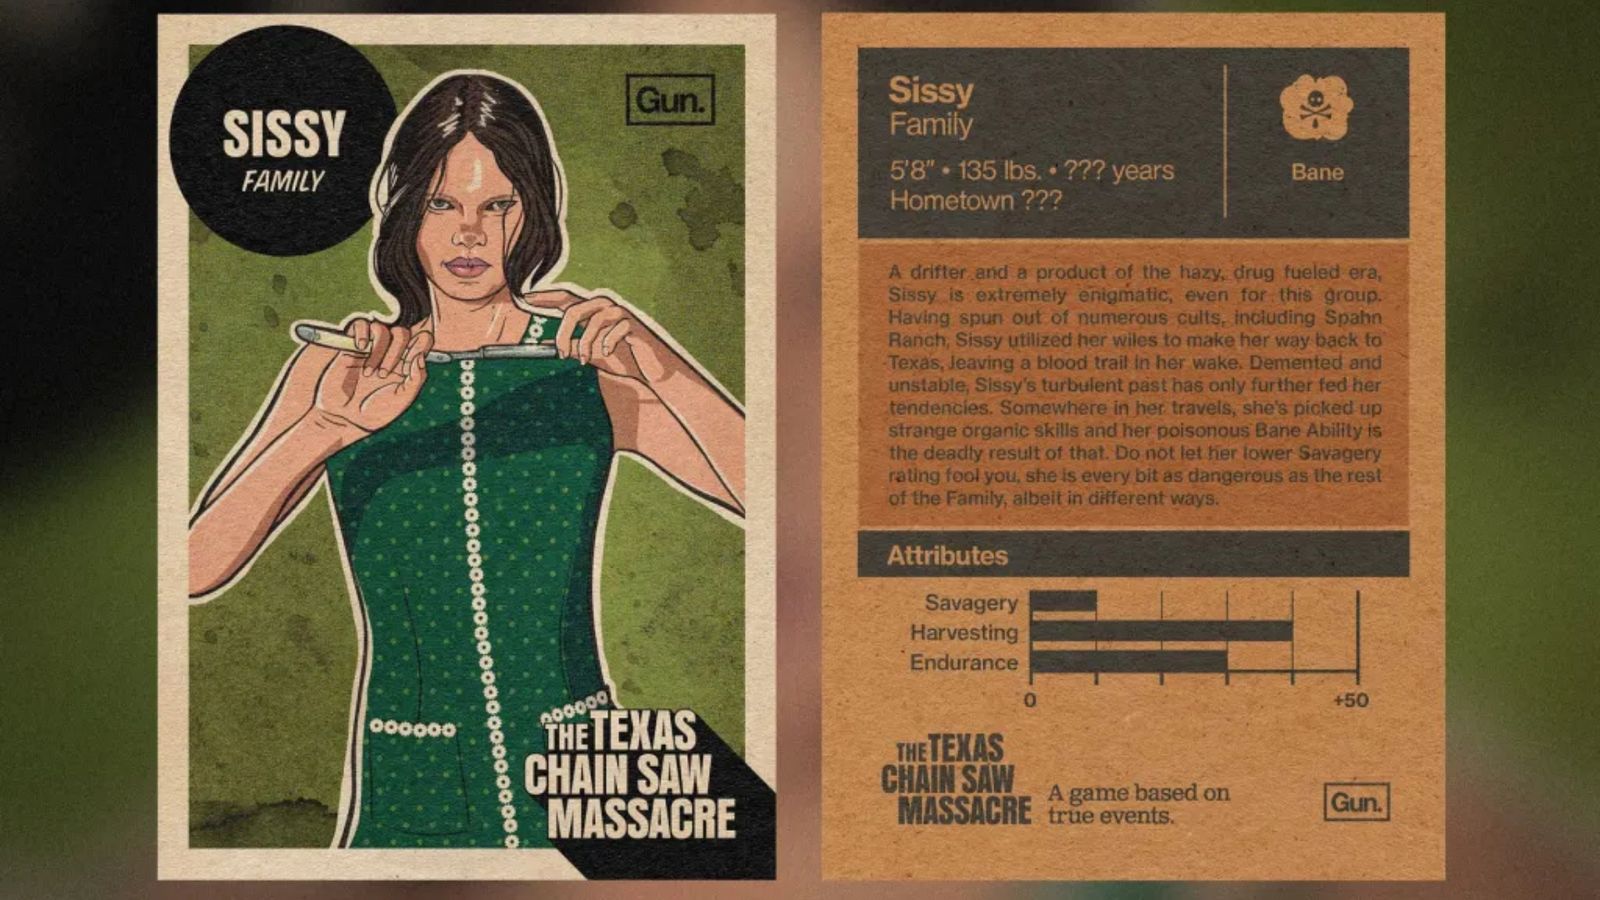 Sissy's profile in Texas Chain Saw Massacre